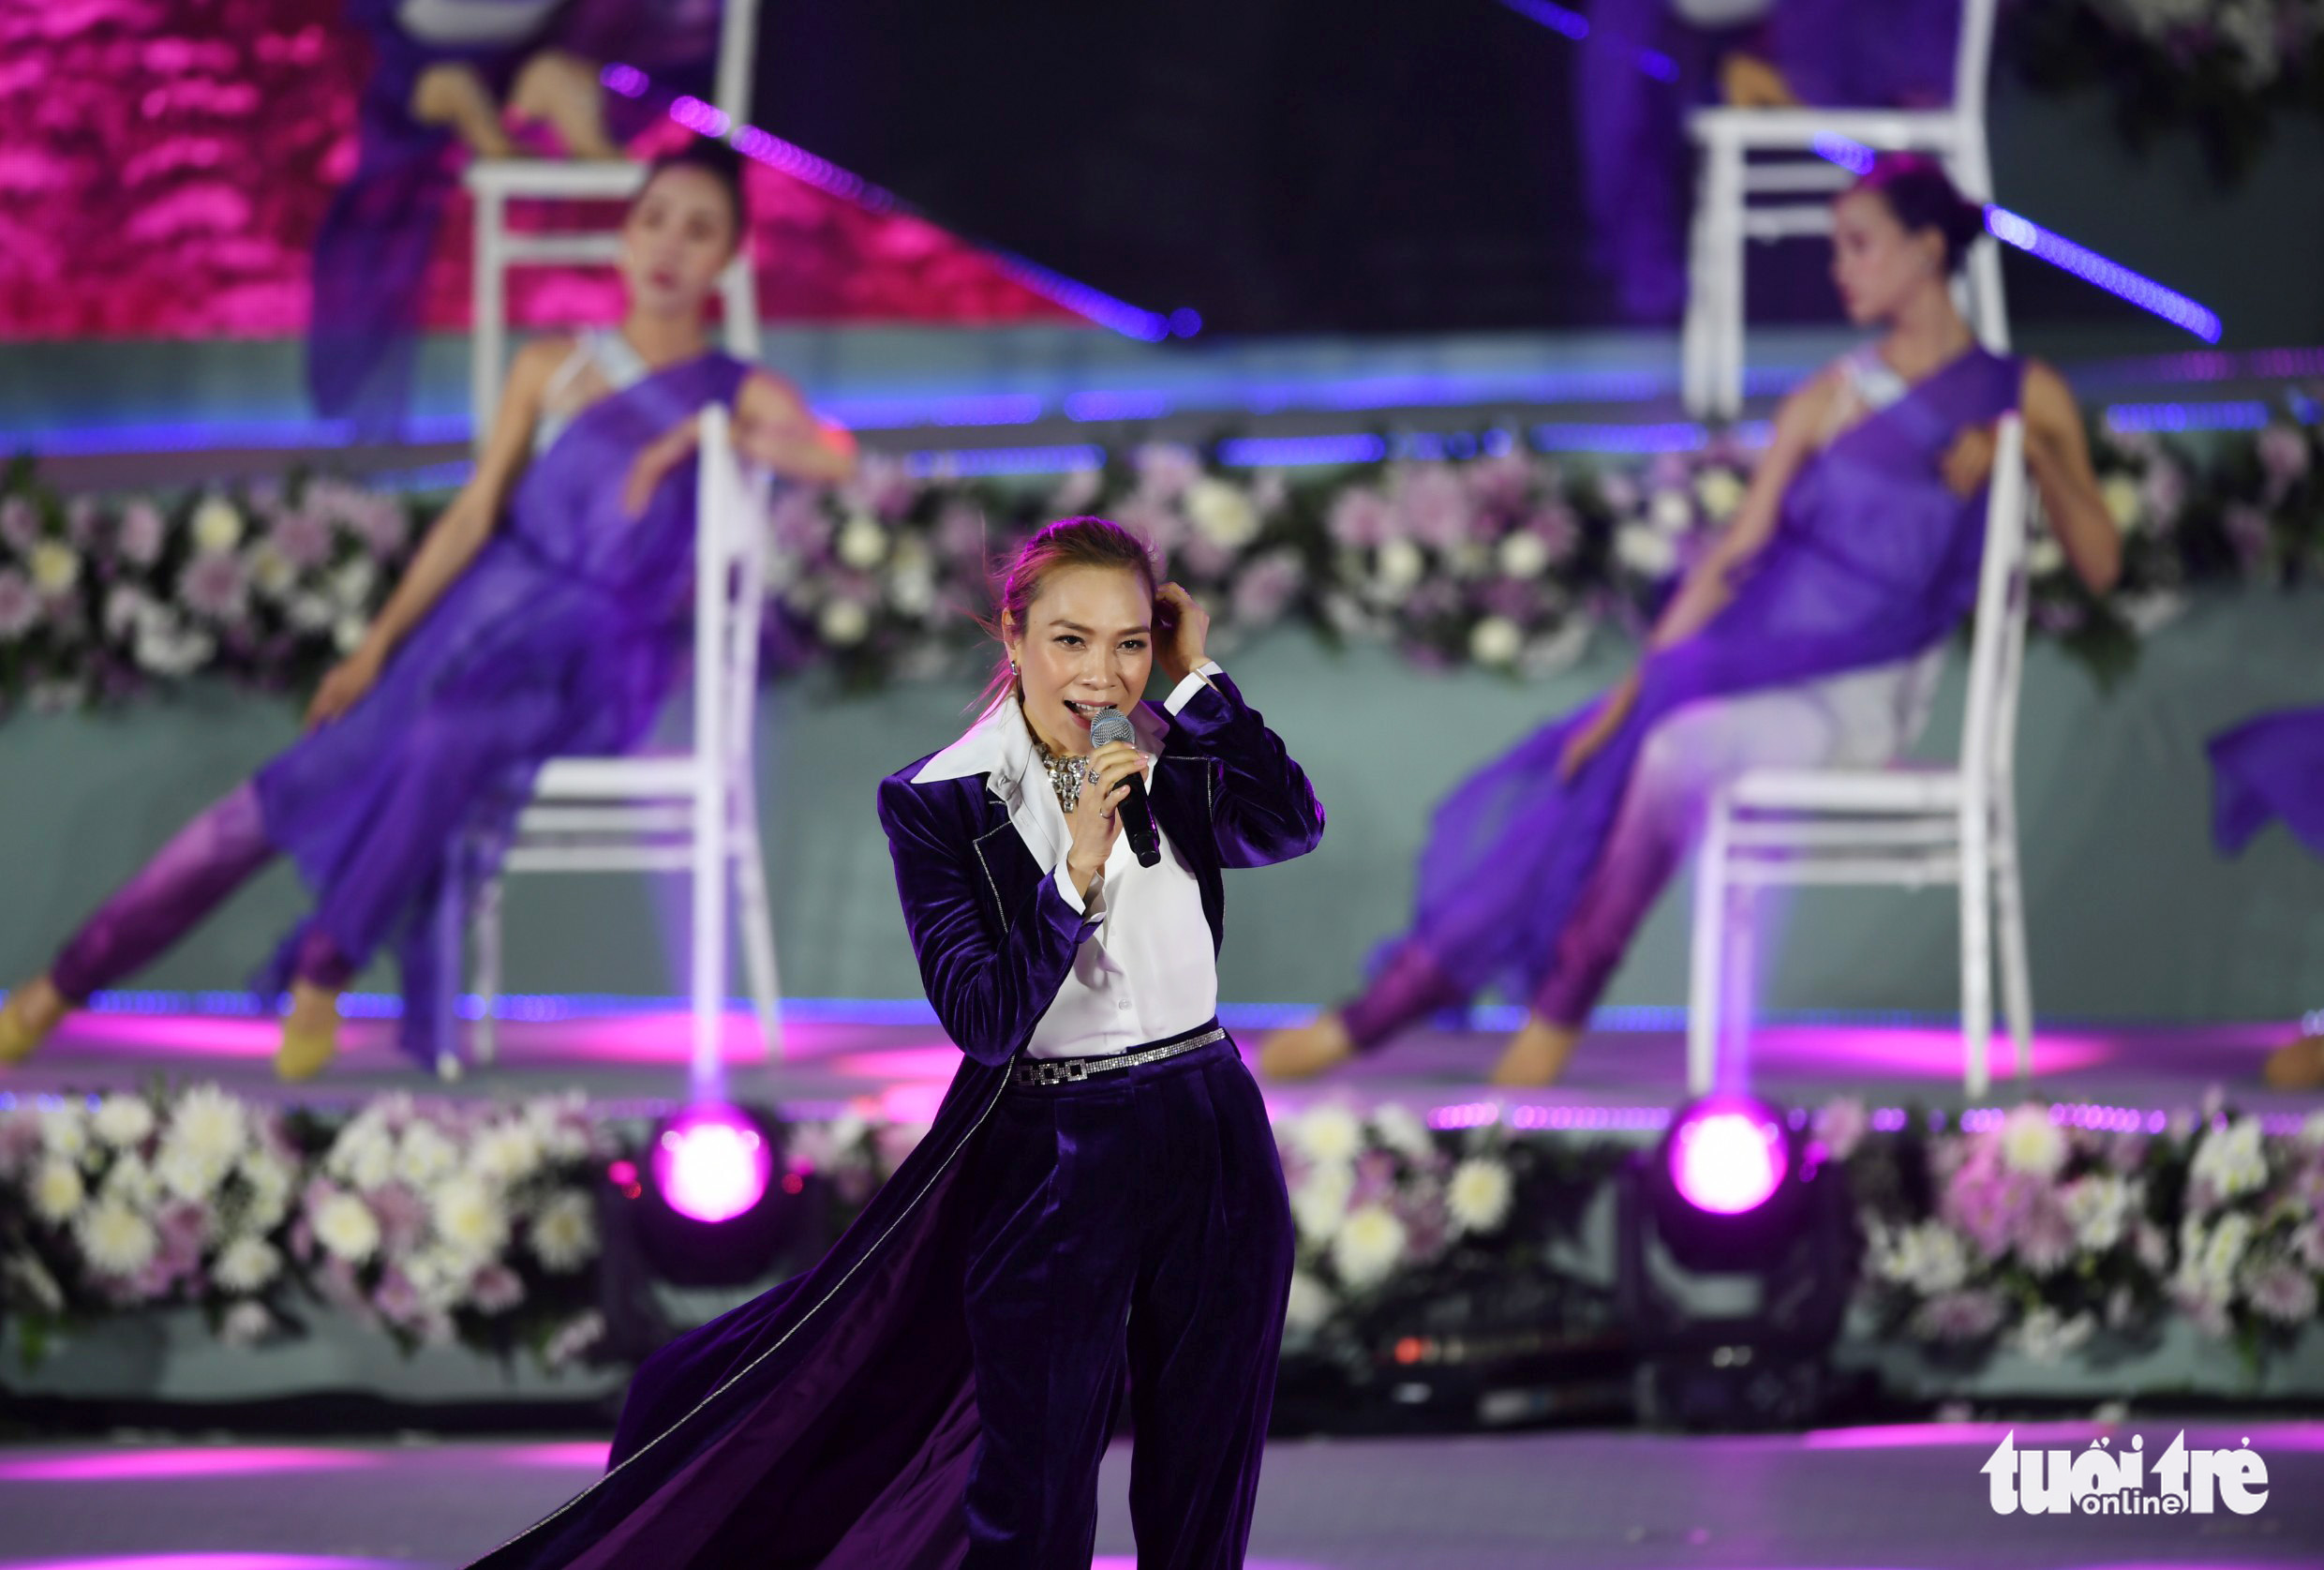 Singer My Tam performs at the opening ceremony of the Da Lat Flower Festival 2022 in Da Lat City, Lam Dong Province, Vietnam, December 18, 2022. Photo: M.V. / Tuoi Tre